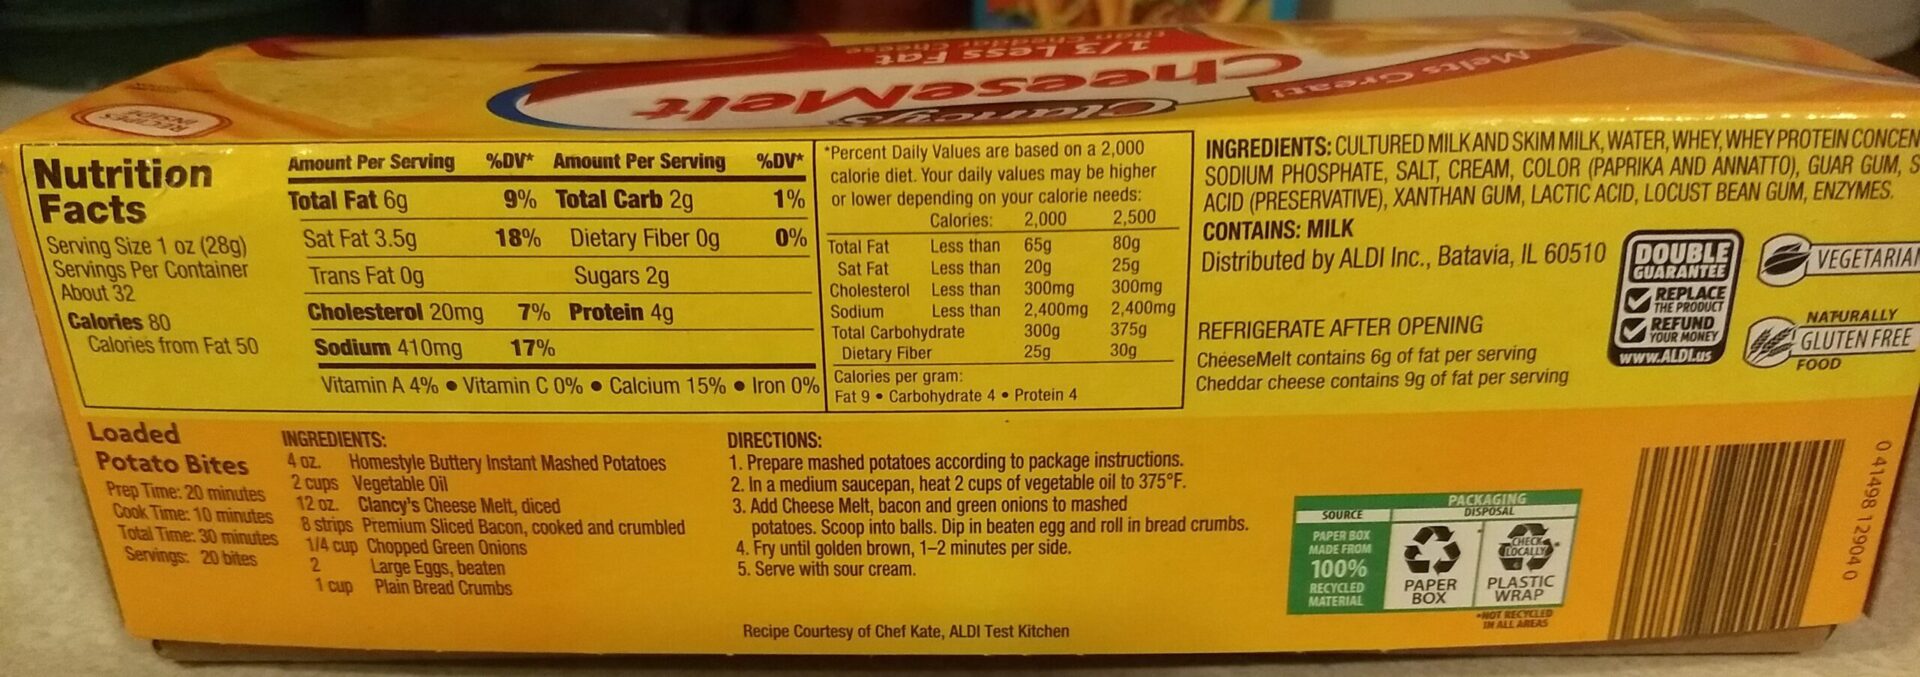 nutrition-label-for-velveeta-ss-and-cheese-bios-pics